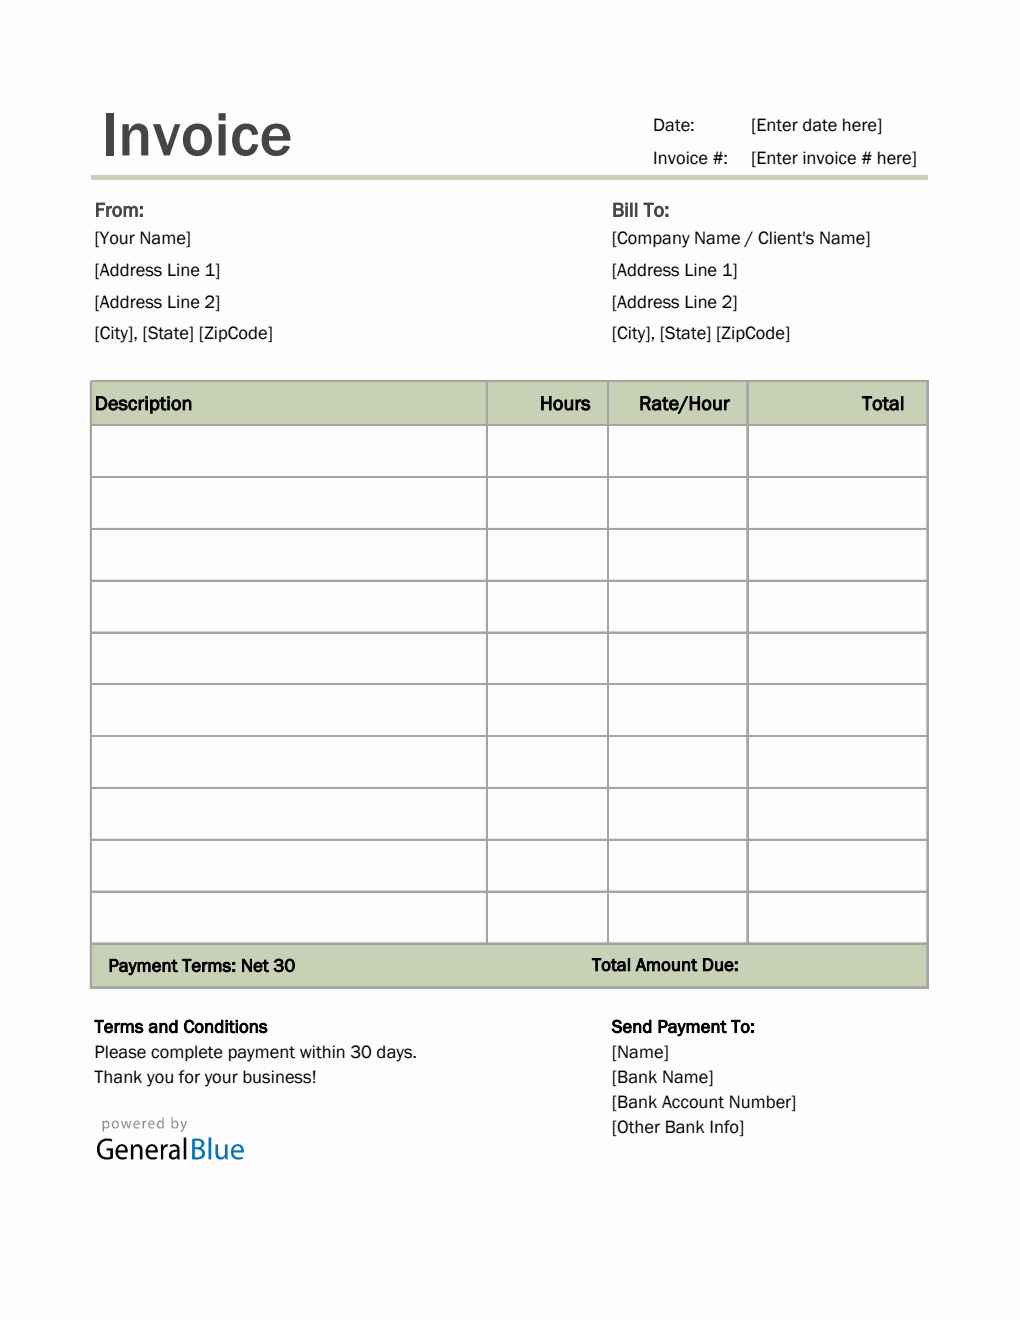 Invoice Template for U.S. Freelancers in Excel (Simple)